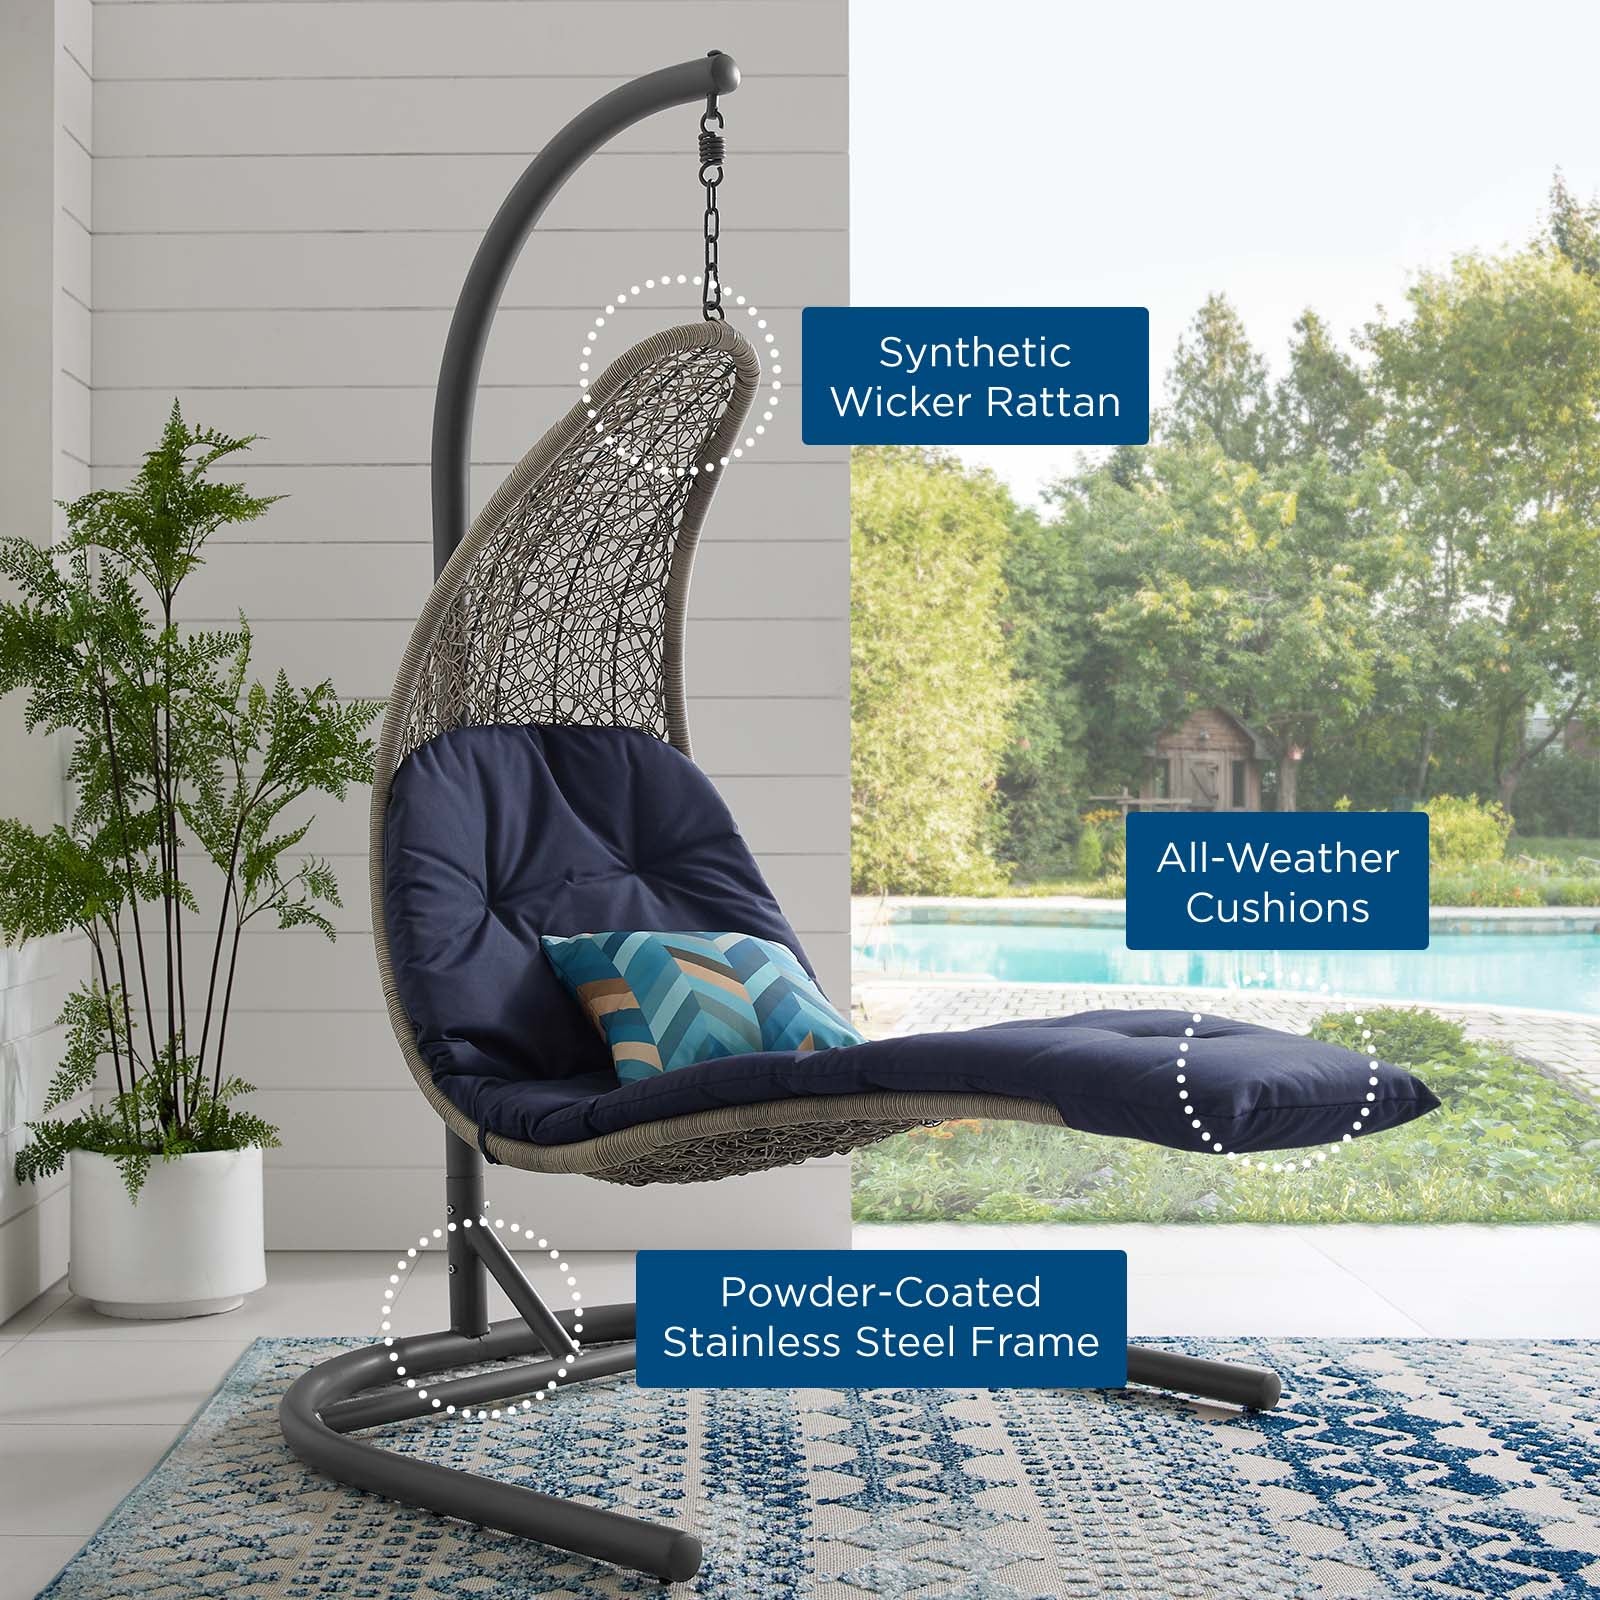 Modway Outdoor Swings - Landscape Hanging Chaise Lounge Outdoor Patio Swing Chair Light Gray Navy